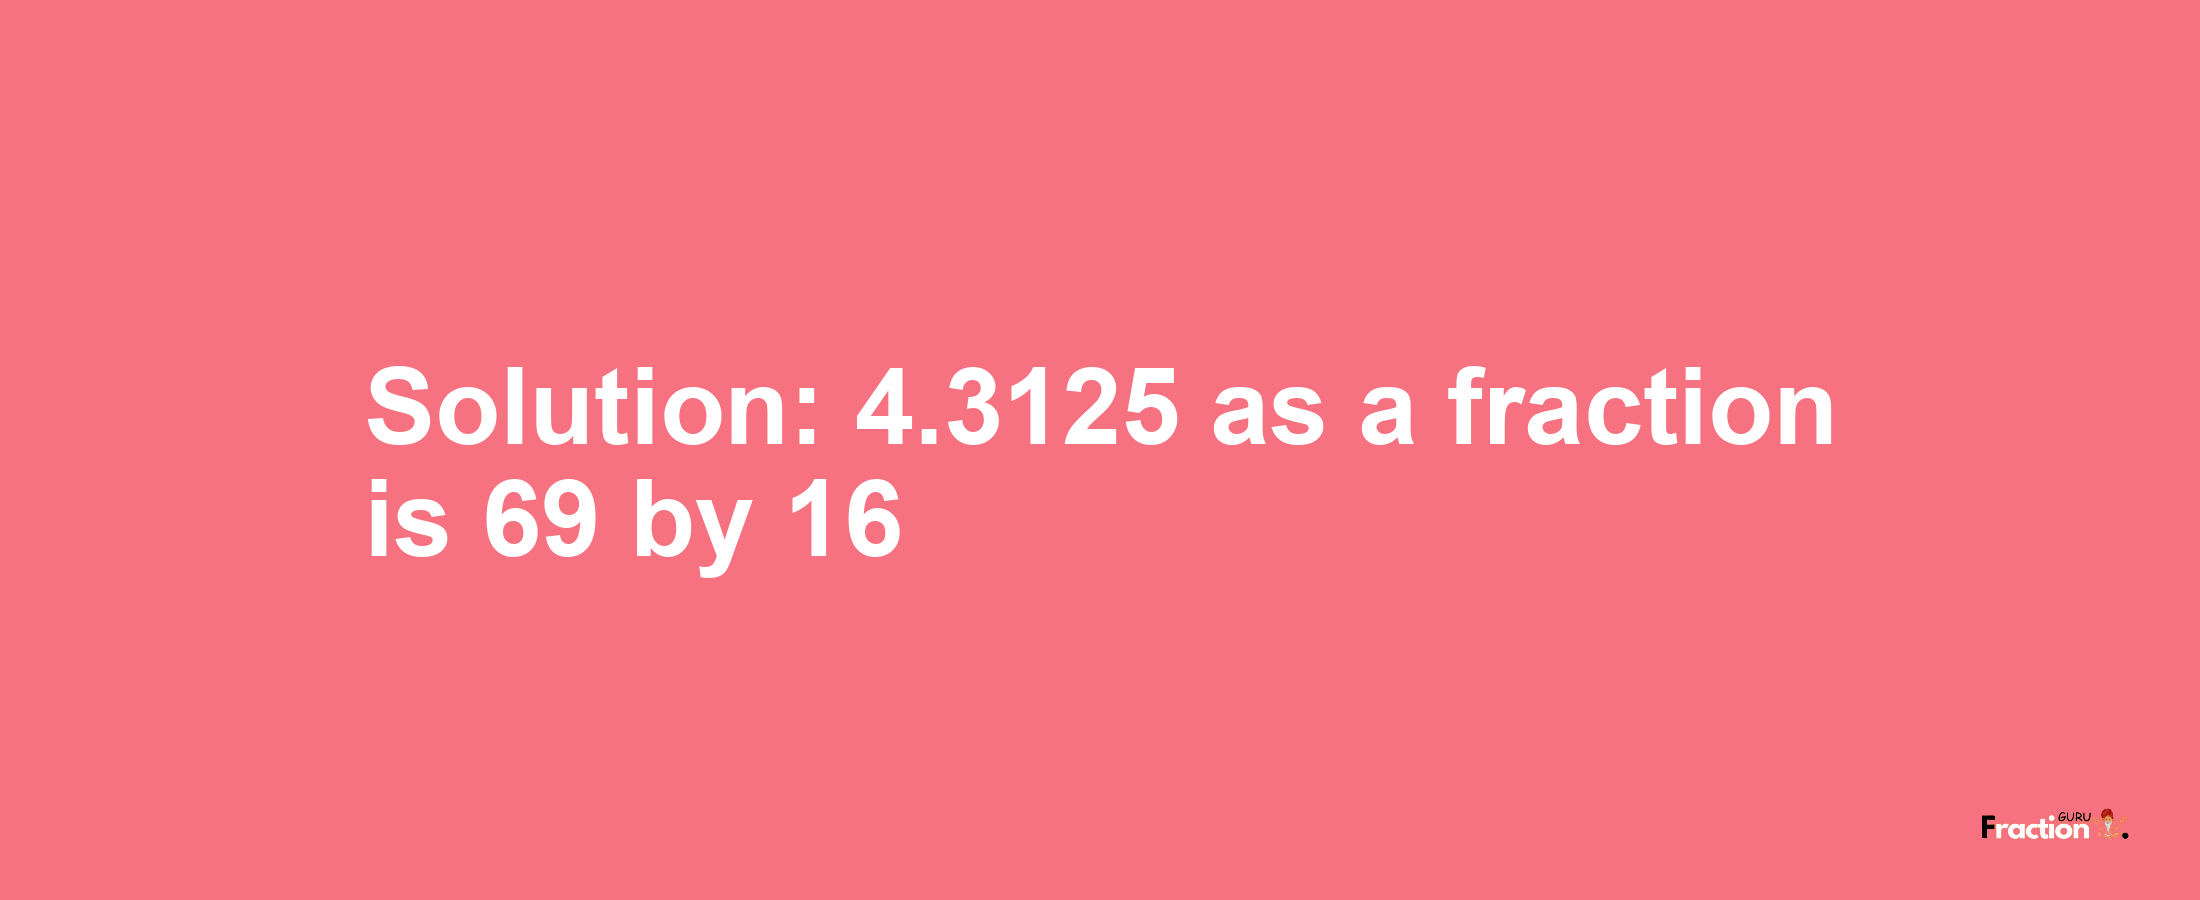 Solution:4.3125 as a fraction is 69/16